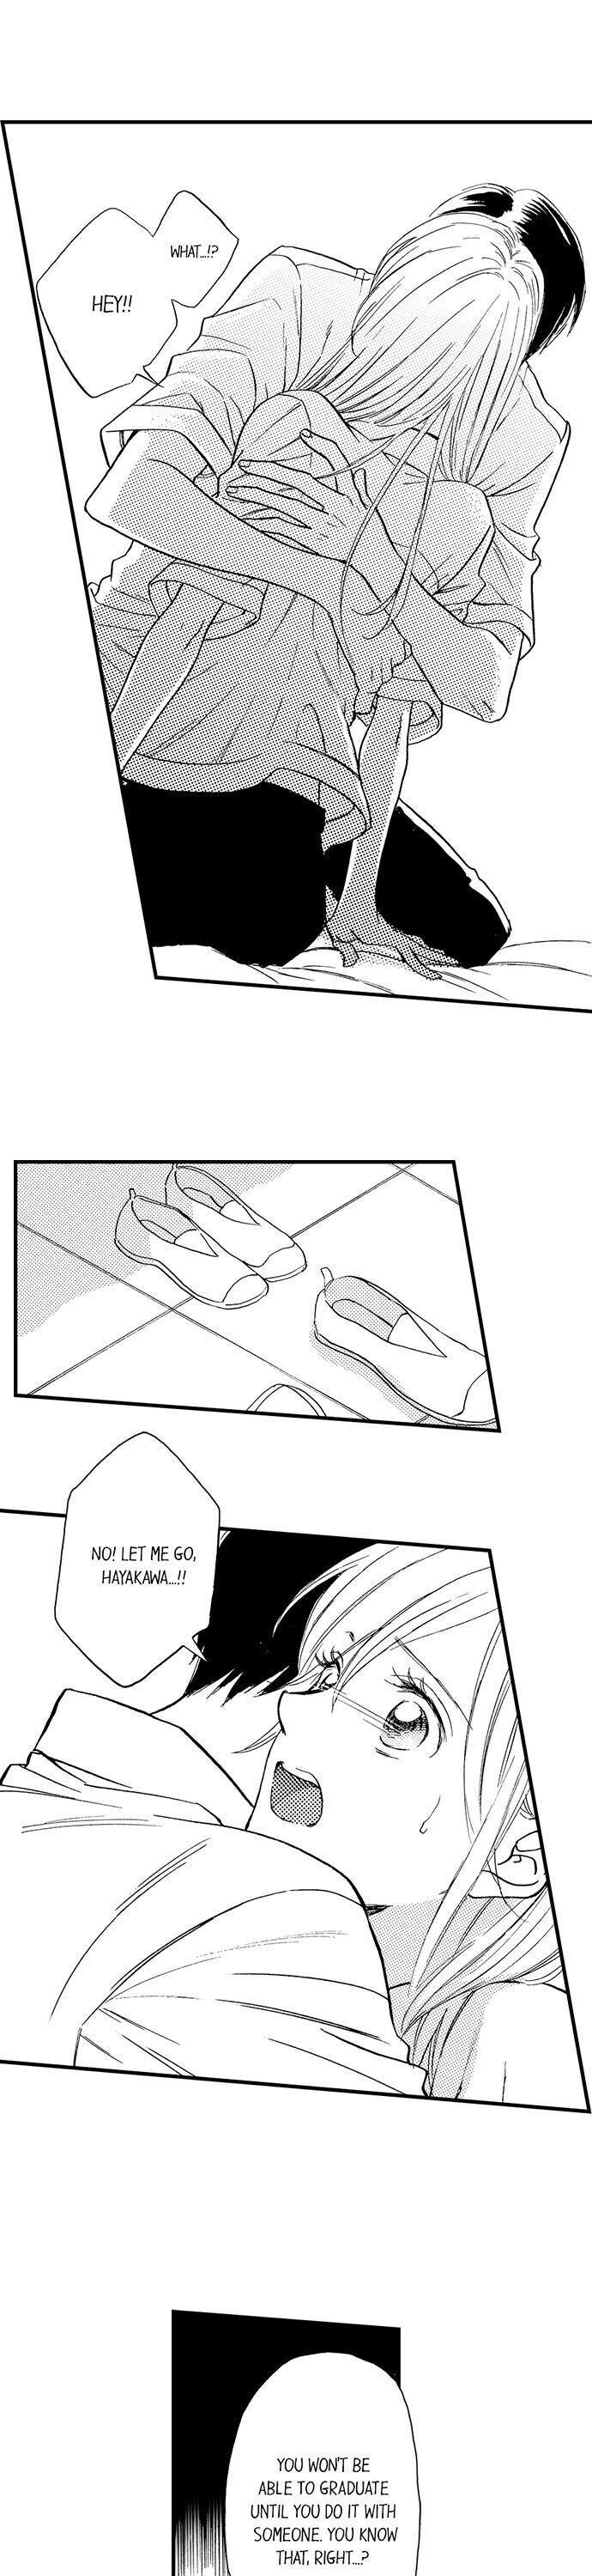 Mandatory Sex Class in Another World - Chapter 13 Page 9